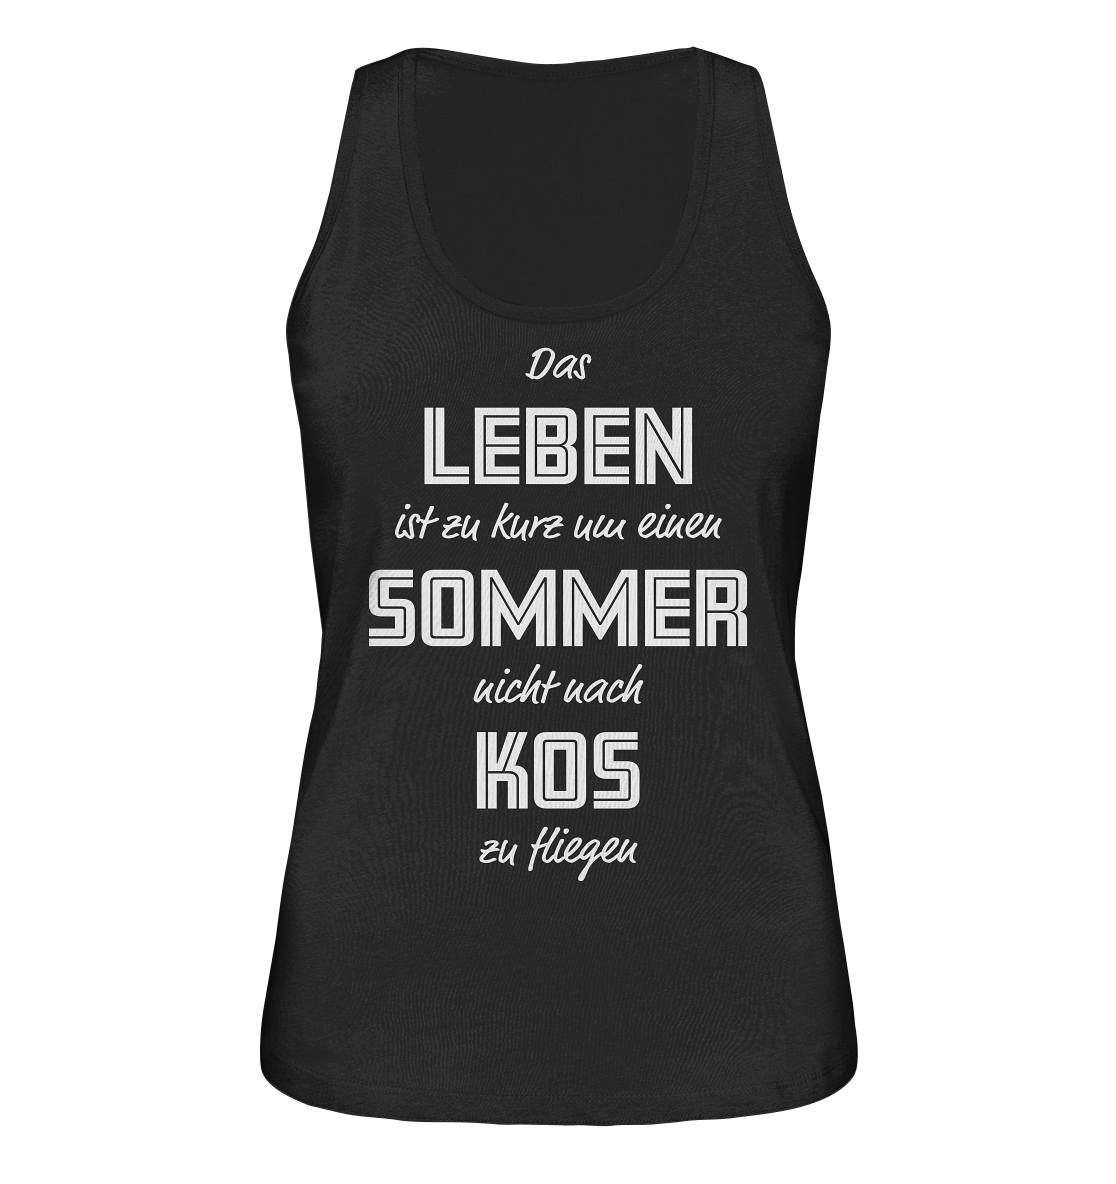 Life is too short not to fly to Kos for a summer - Ladies Organic Tank Top